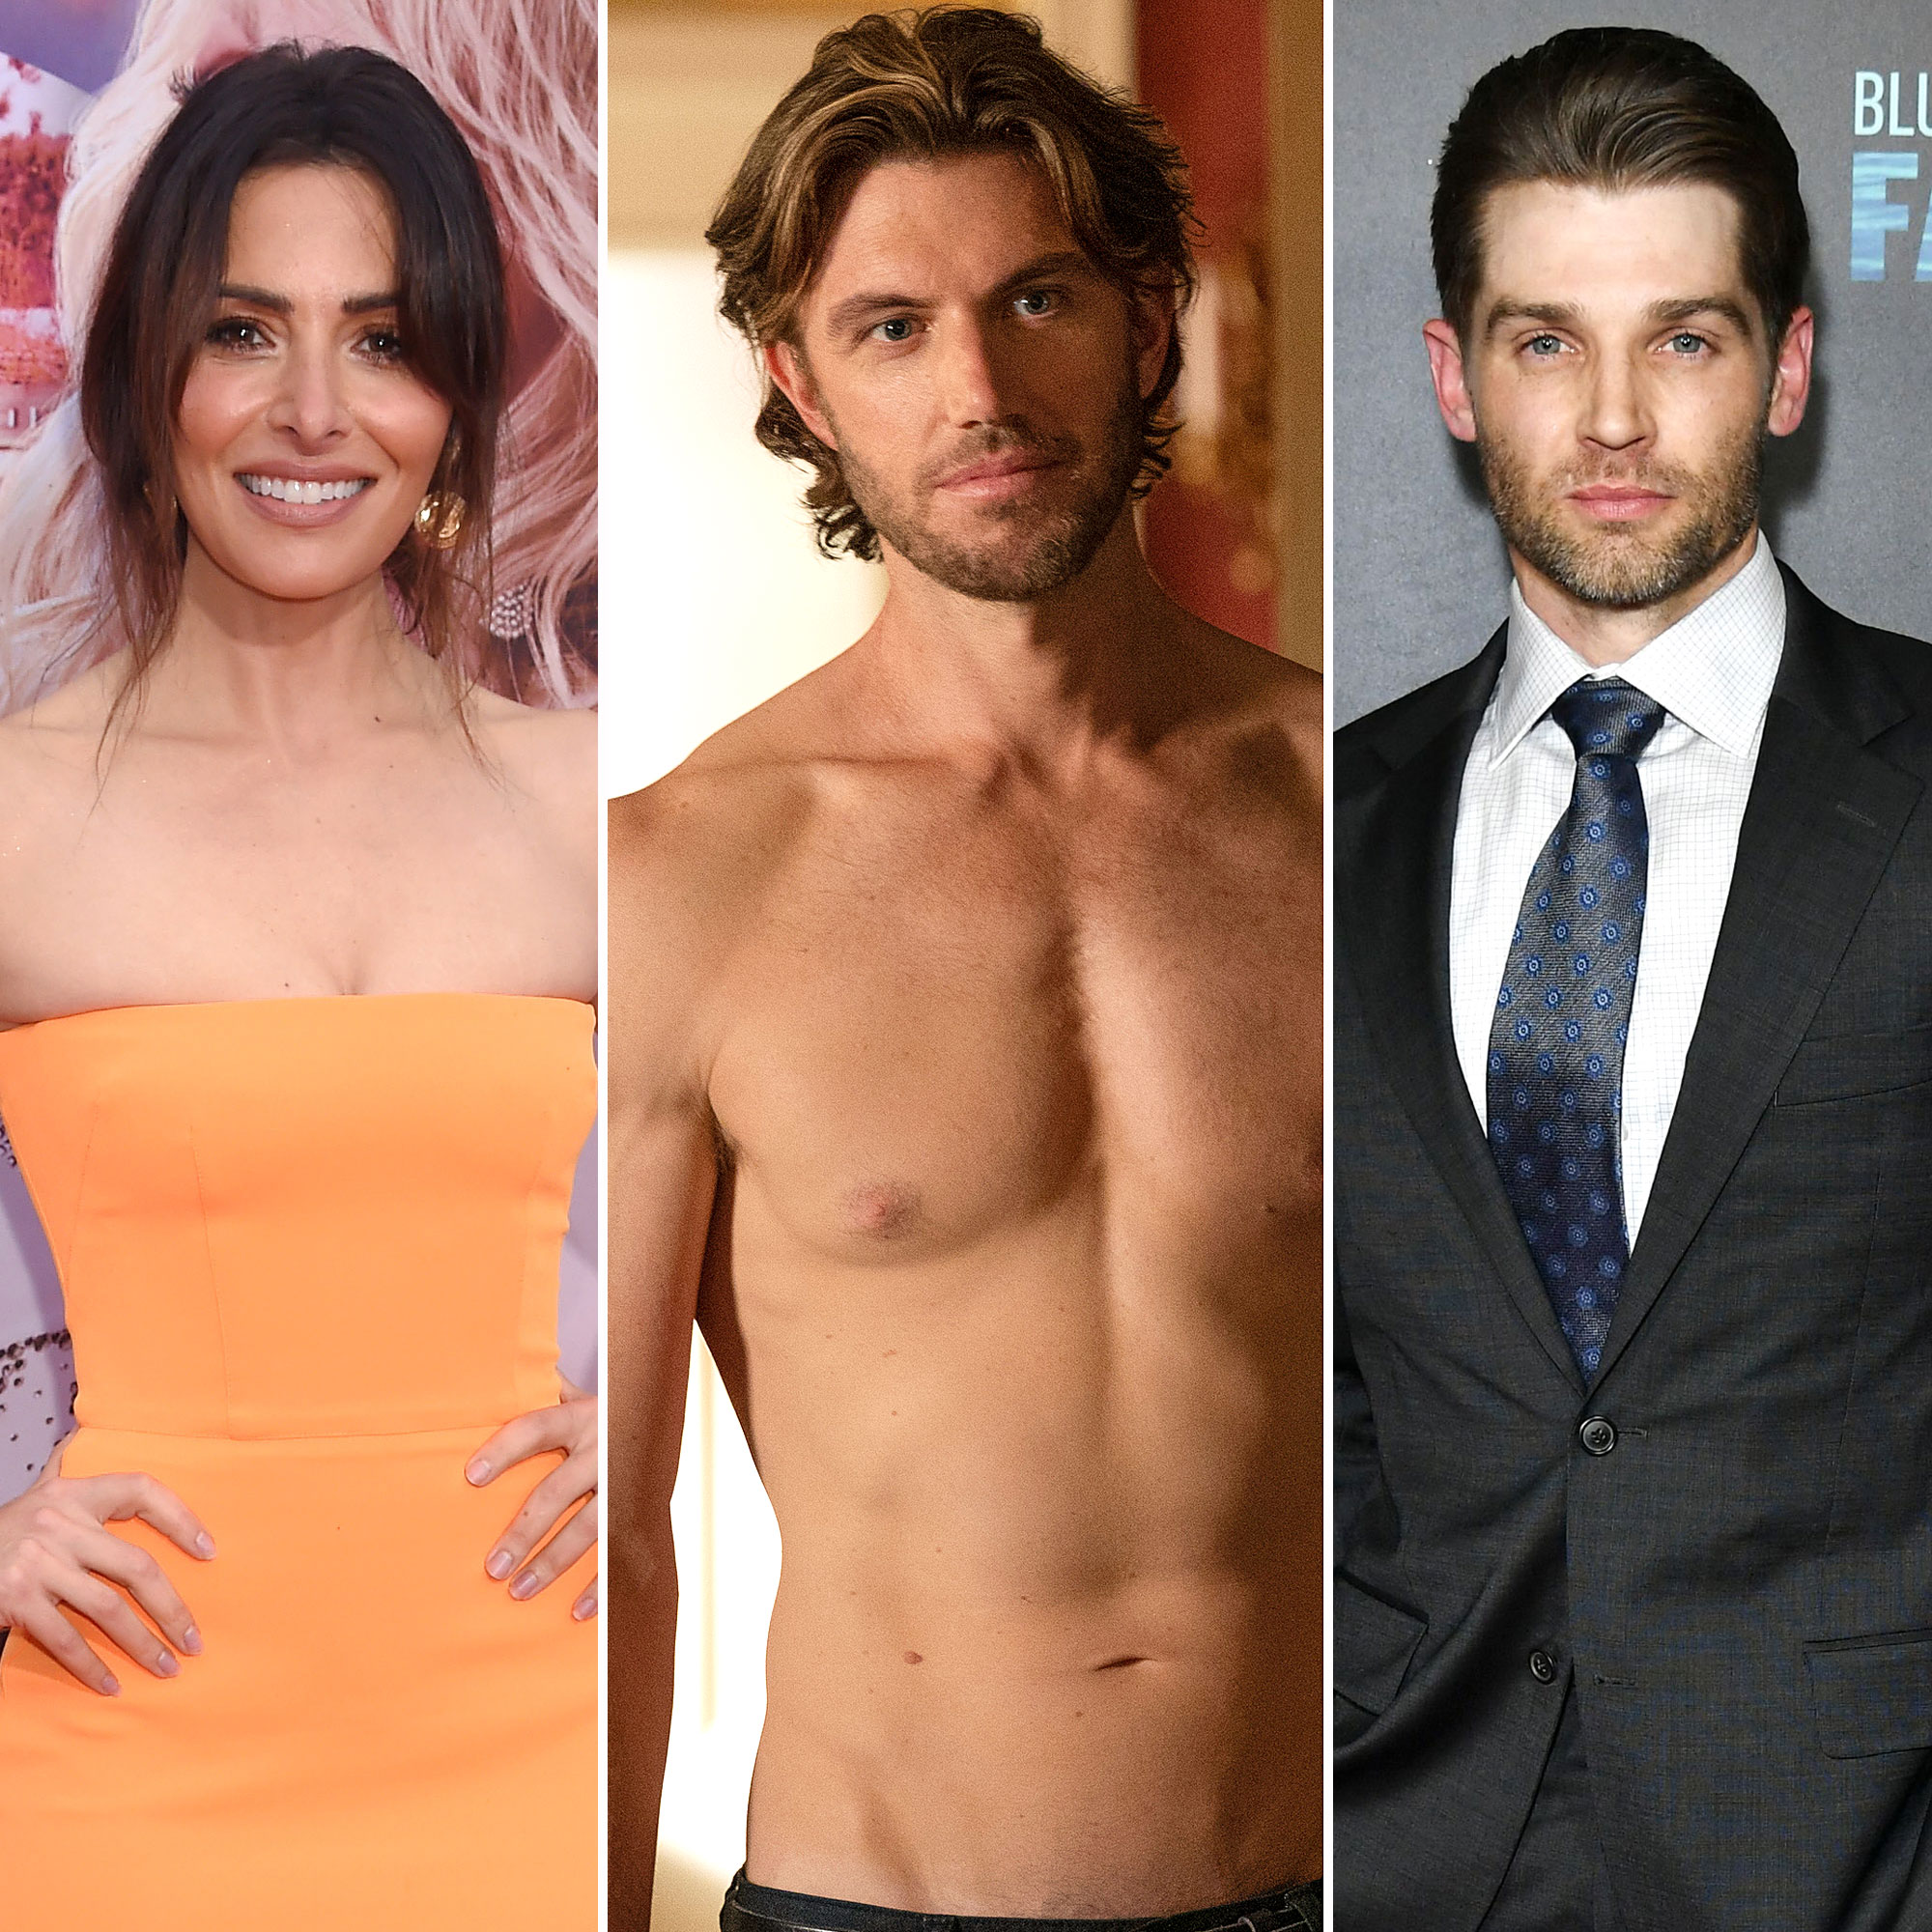 8 Mard 1 Girl Sex - Sex/Life' Cast: Who the Stars Have Dated in Real Life